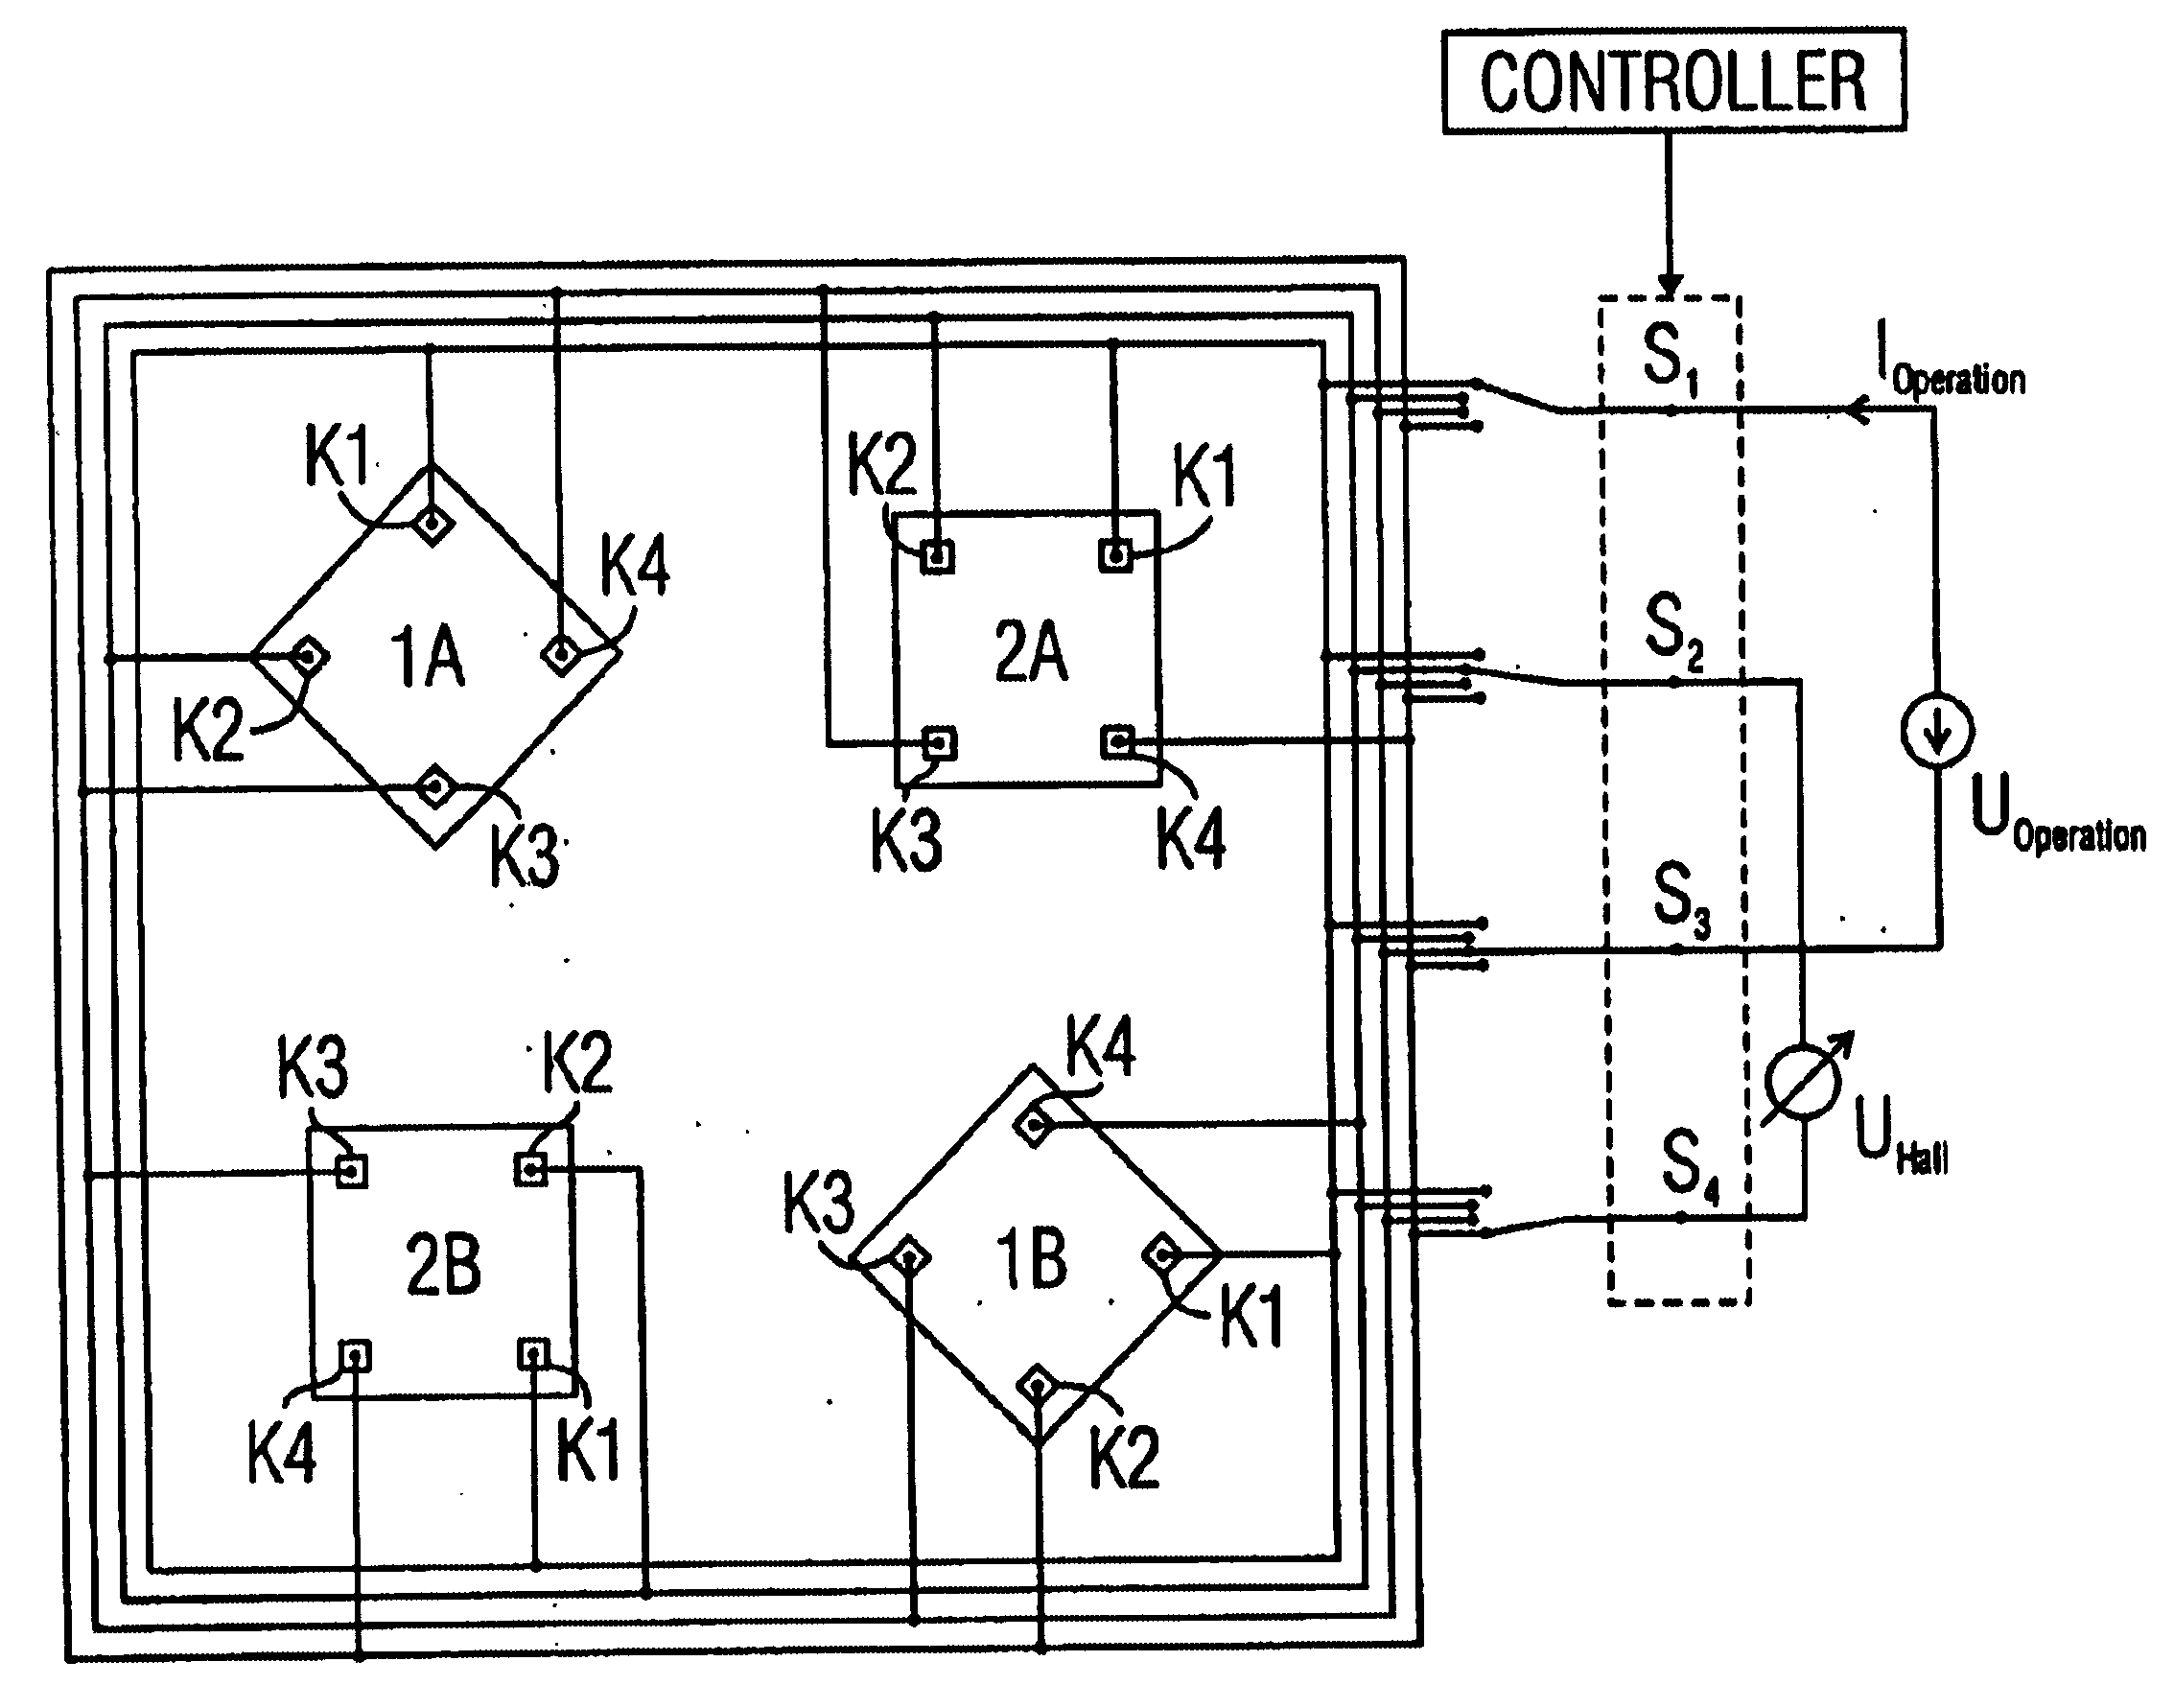 Hall sensor array for measuring a magnetic field with offset compensation